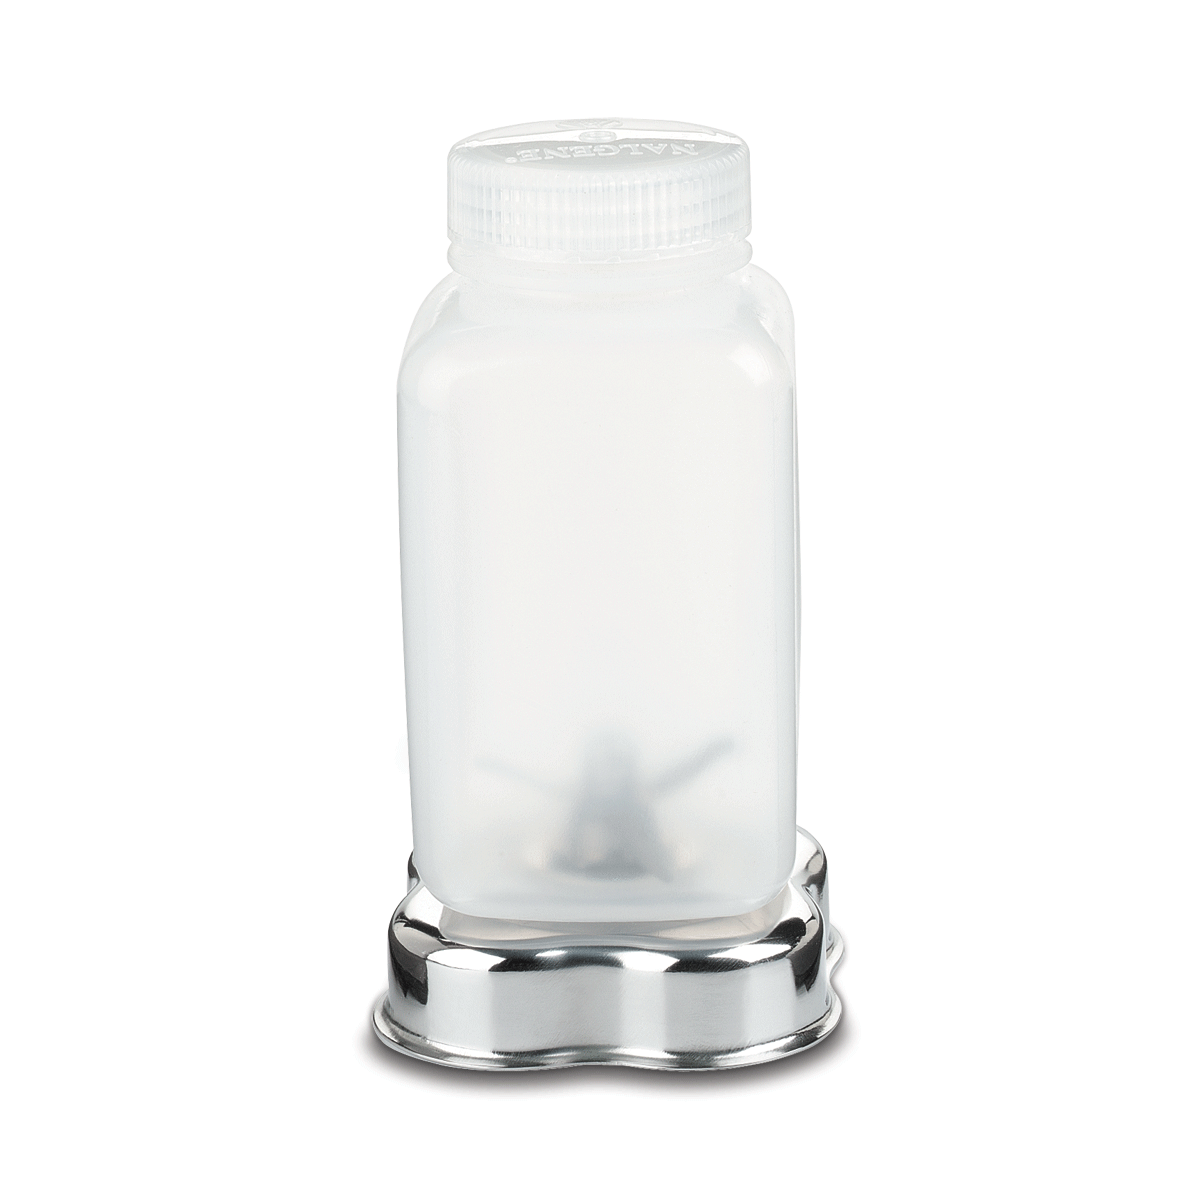 https://waringlab.com/assets/images/database/products/cac64-waring-lab-polypropylene-container-main.png